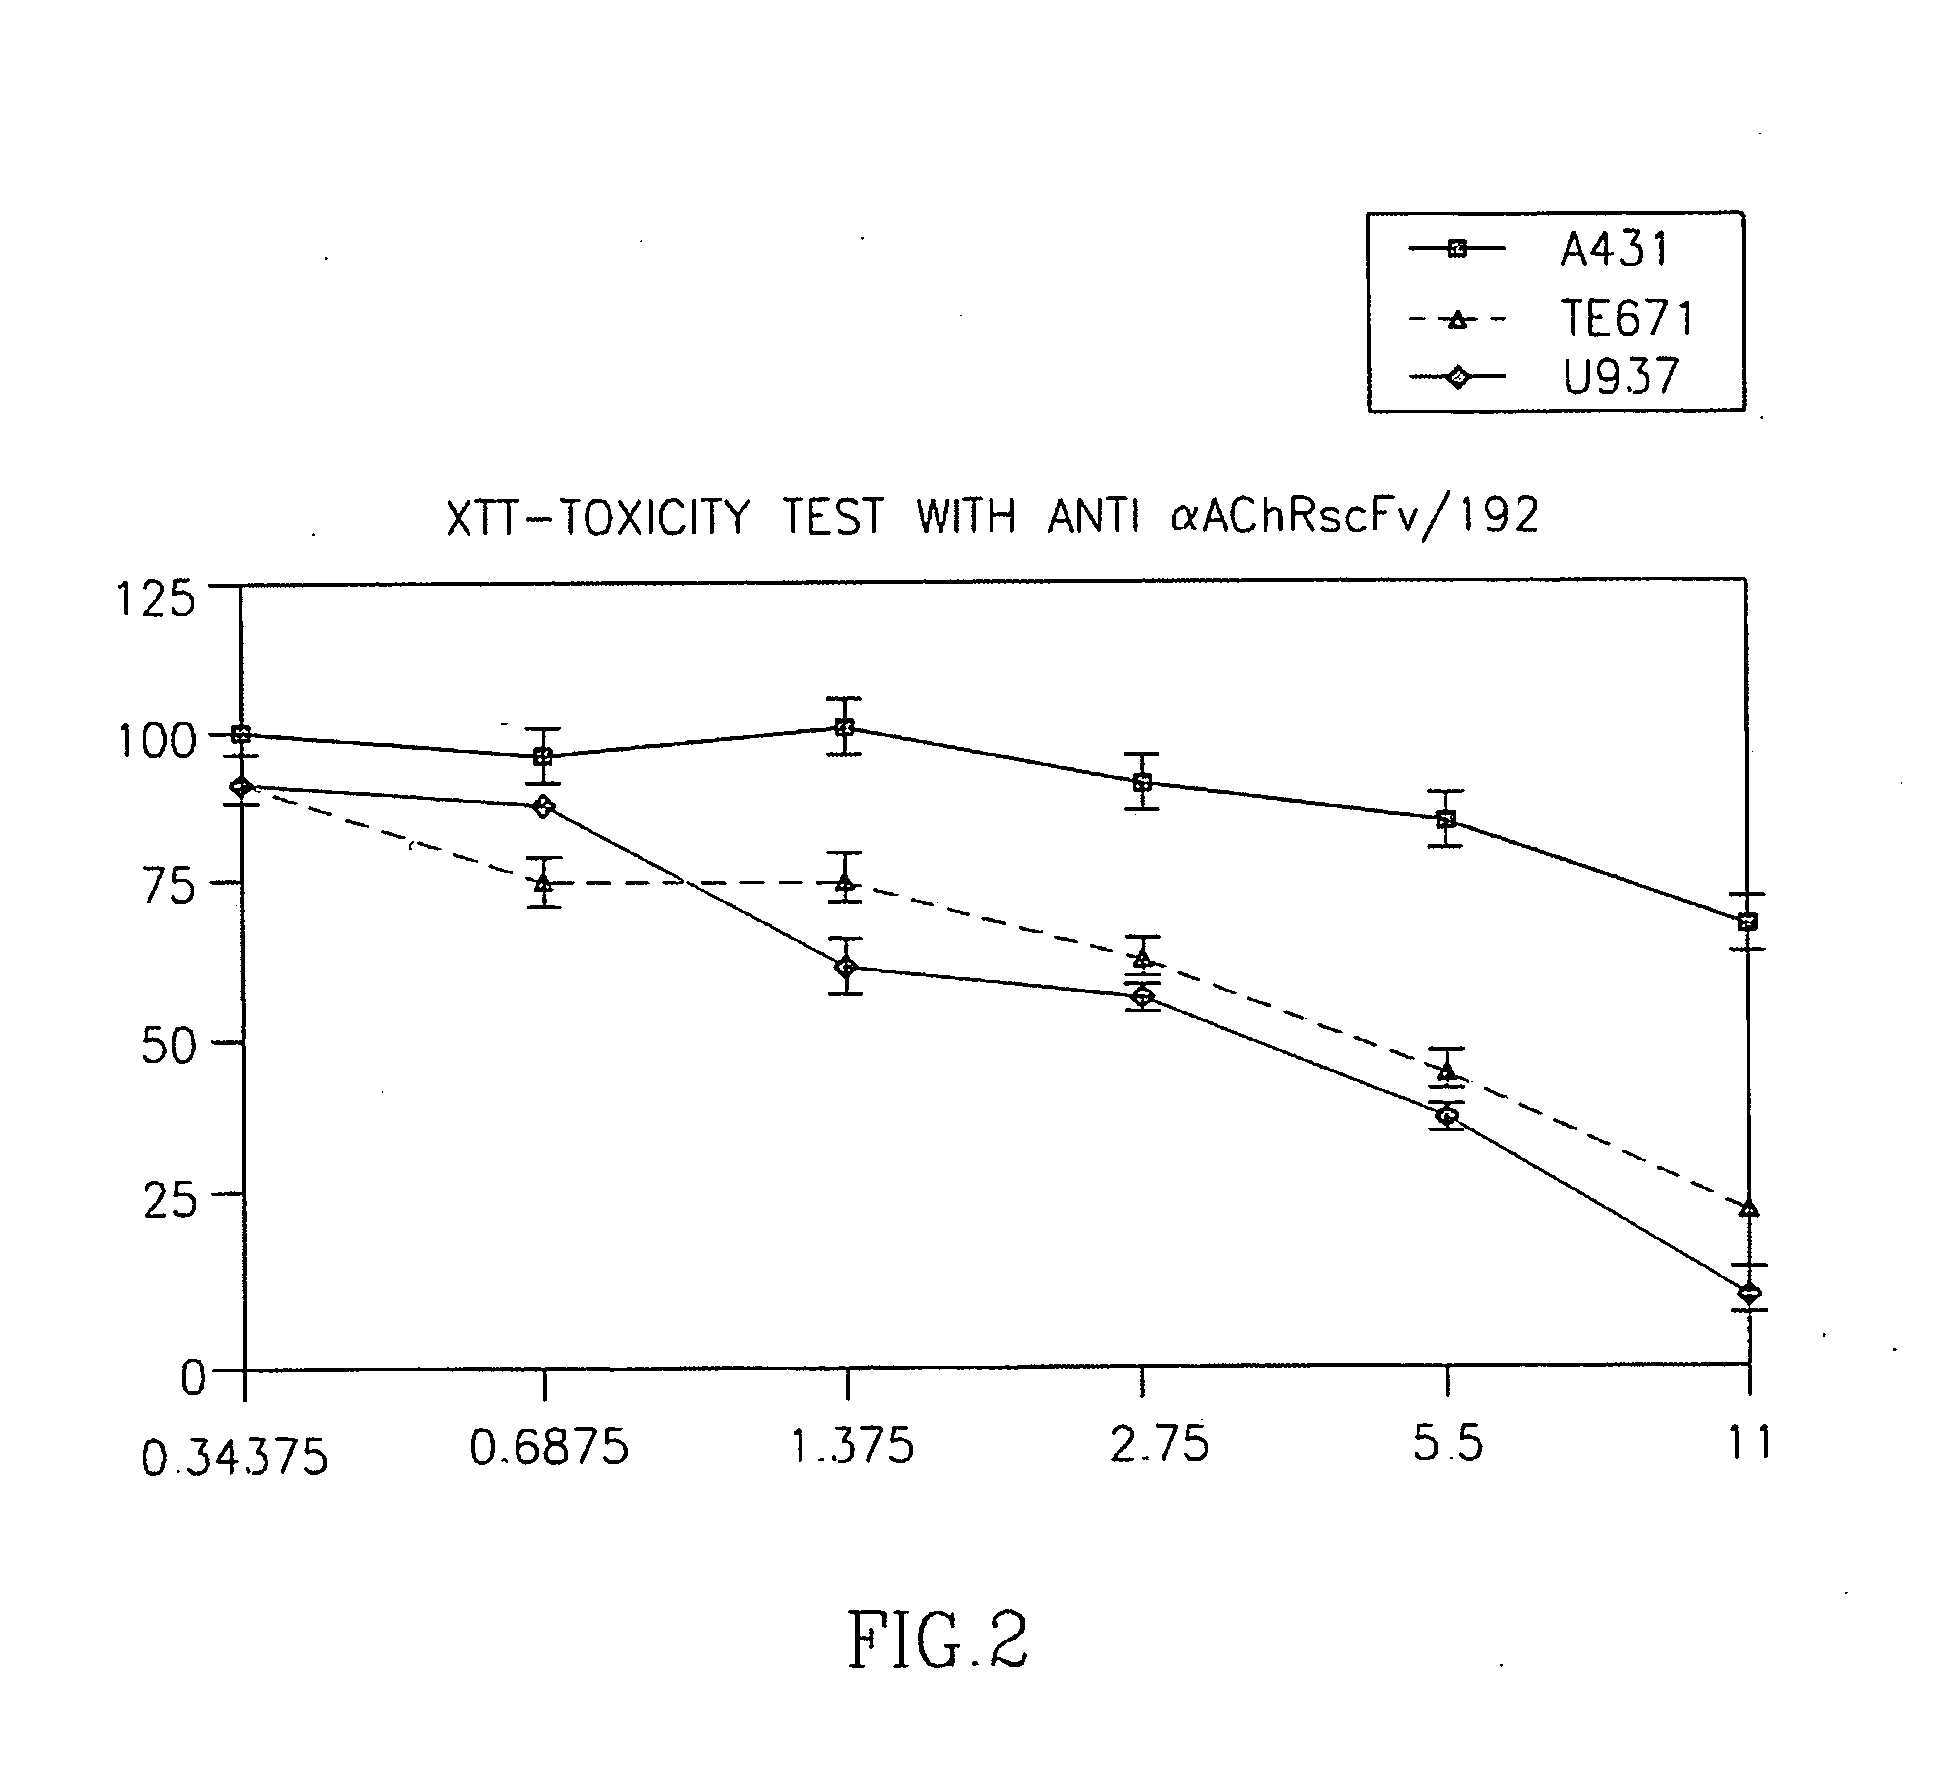 Immunotoxin derived from a recombinant human autoantibody and method of using thereof